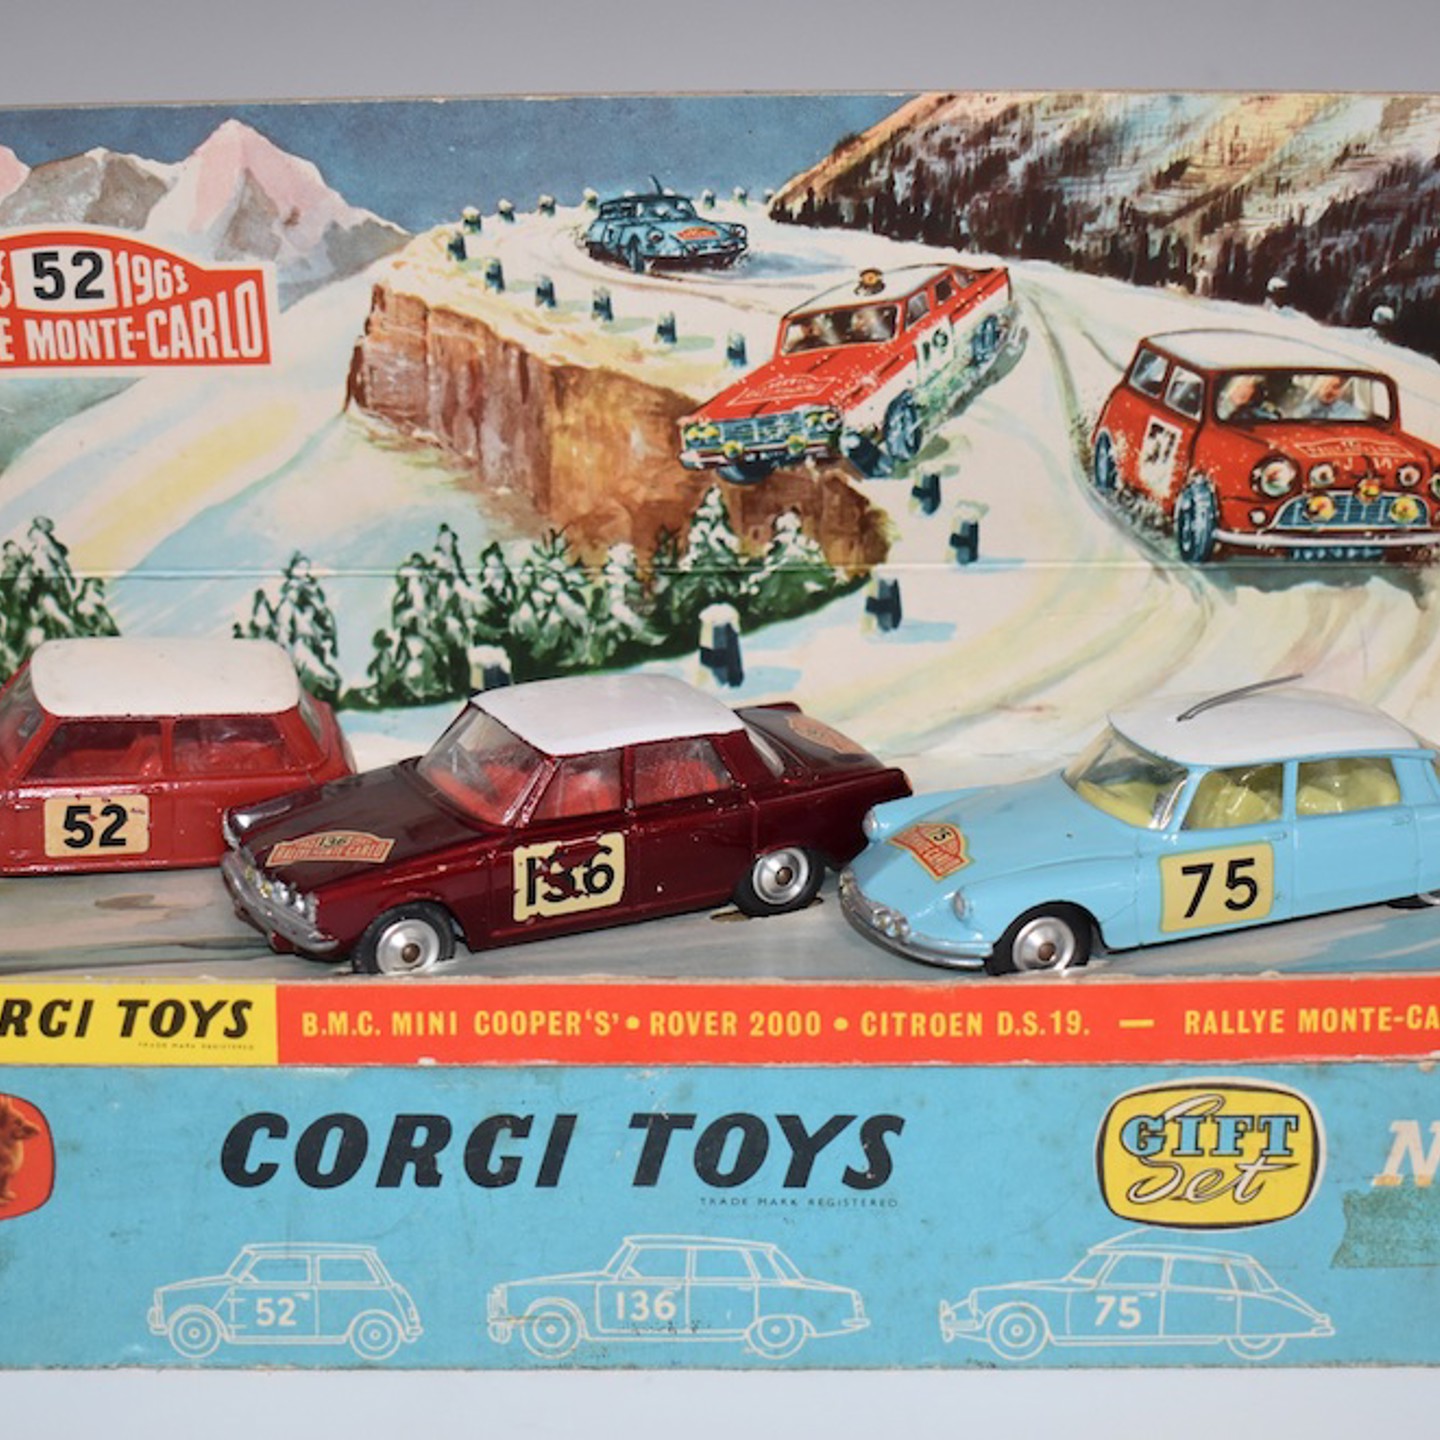 Corgi Toys Diecast Model Gift Set 38 Rallye Monte Carlo With BMC Mini Cooper 'S', Rover 2000 And Citroen DS19, In Original Box With Picture Display Stand. Sold £550